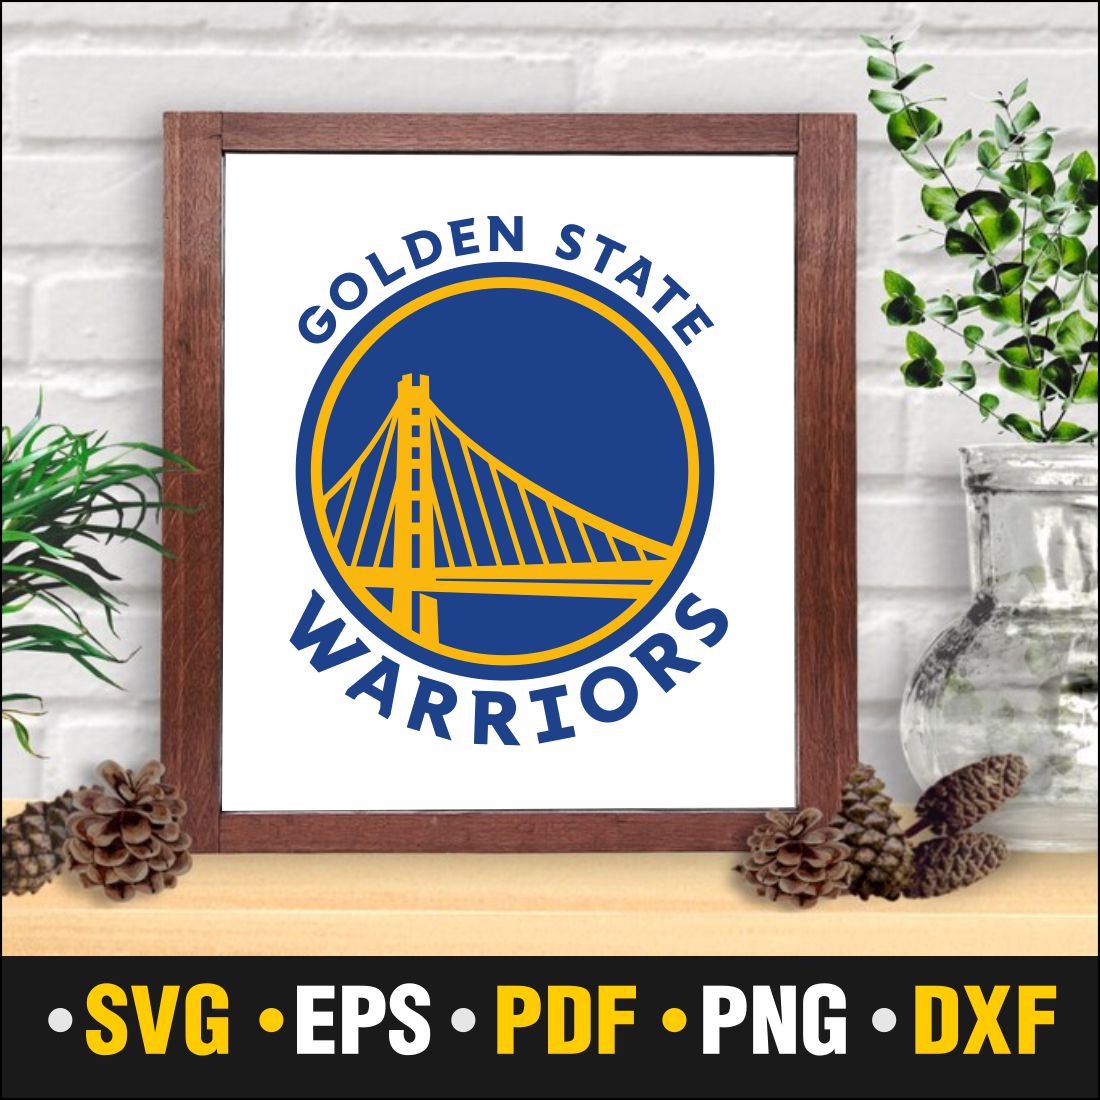 Golden Gate Warrior Svg, Golden Gate Warrior, Golden Gate Svg, GGW Png, Golden Gate Warrior Png, College Monogram Svg, Fooball Svg, Instant Download Vector Cut file Cricut, Silhouette, Pdf Png, Dxf, Decal preview image.